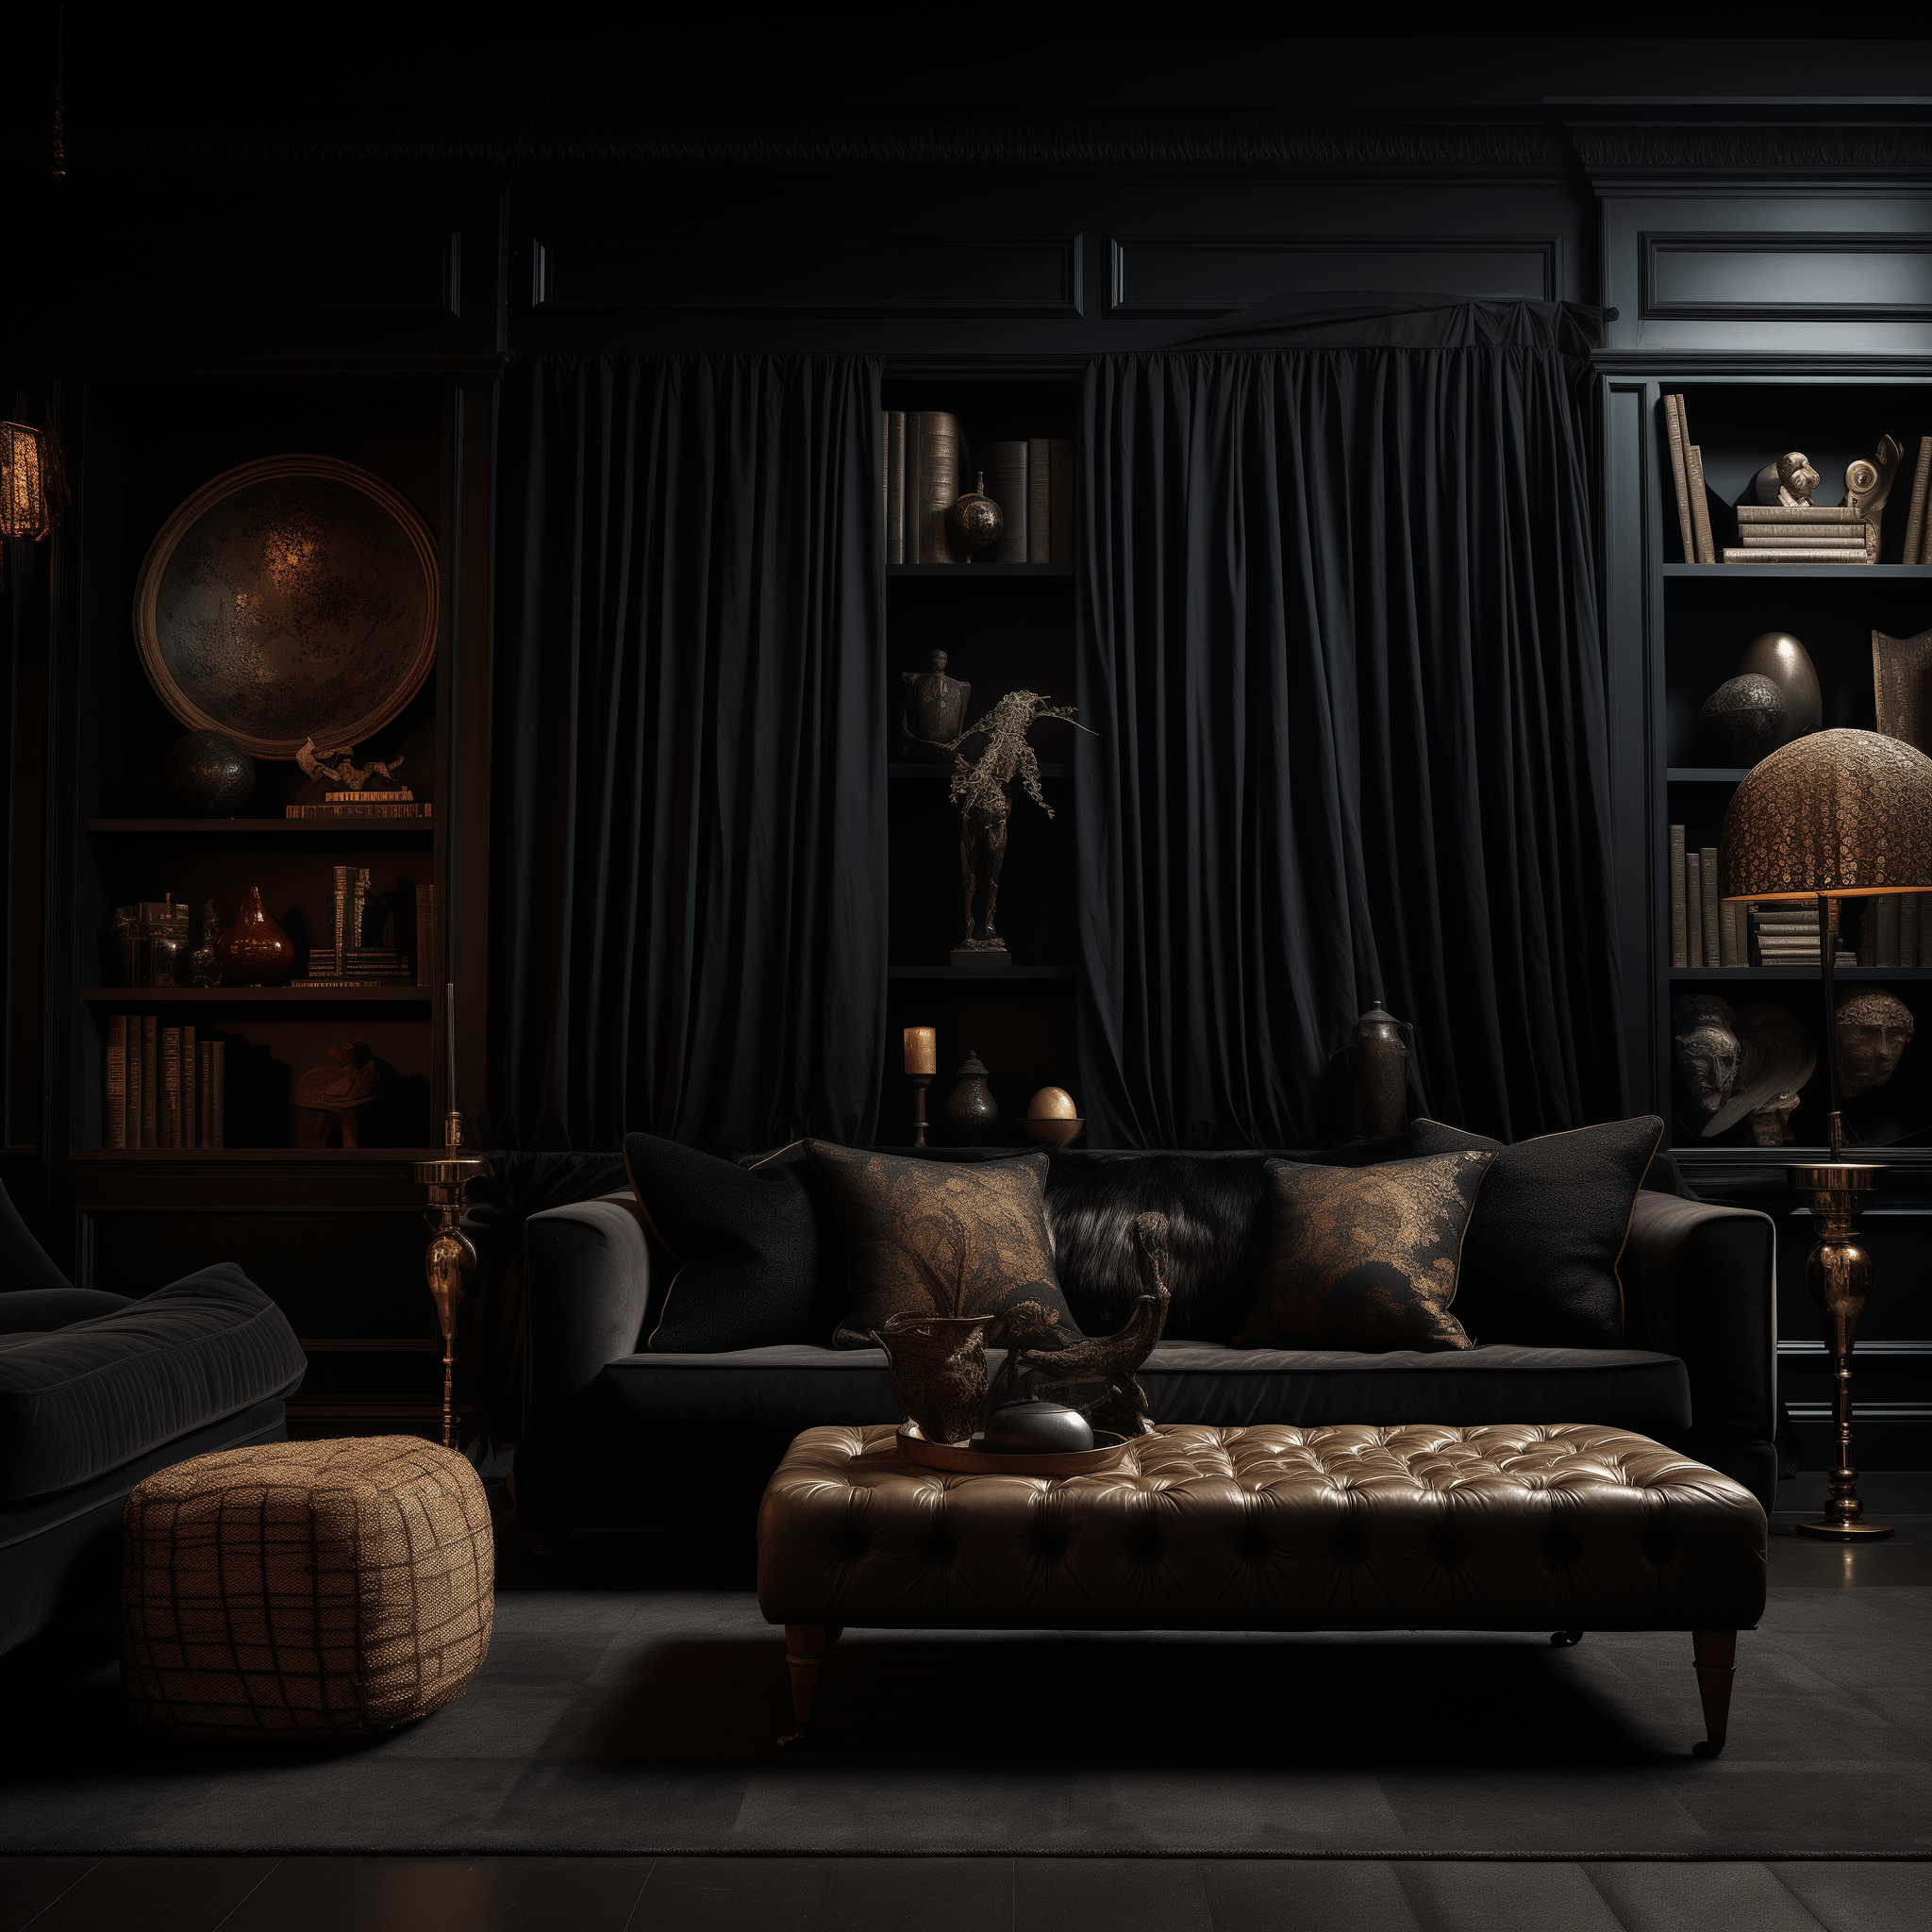 Cozy and dark living room, photographed from an eye-level angle, highlighting luxurious textiles and architectural elegance.